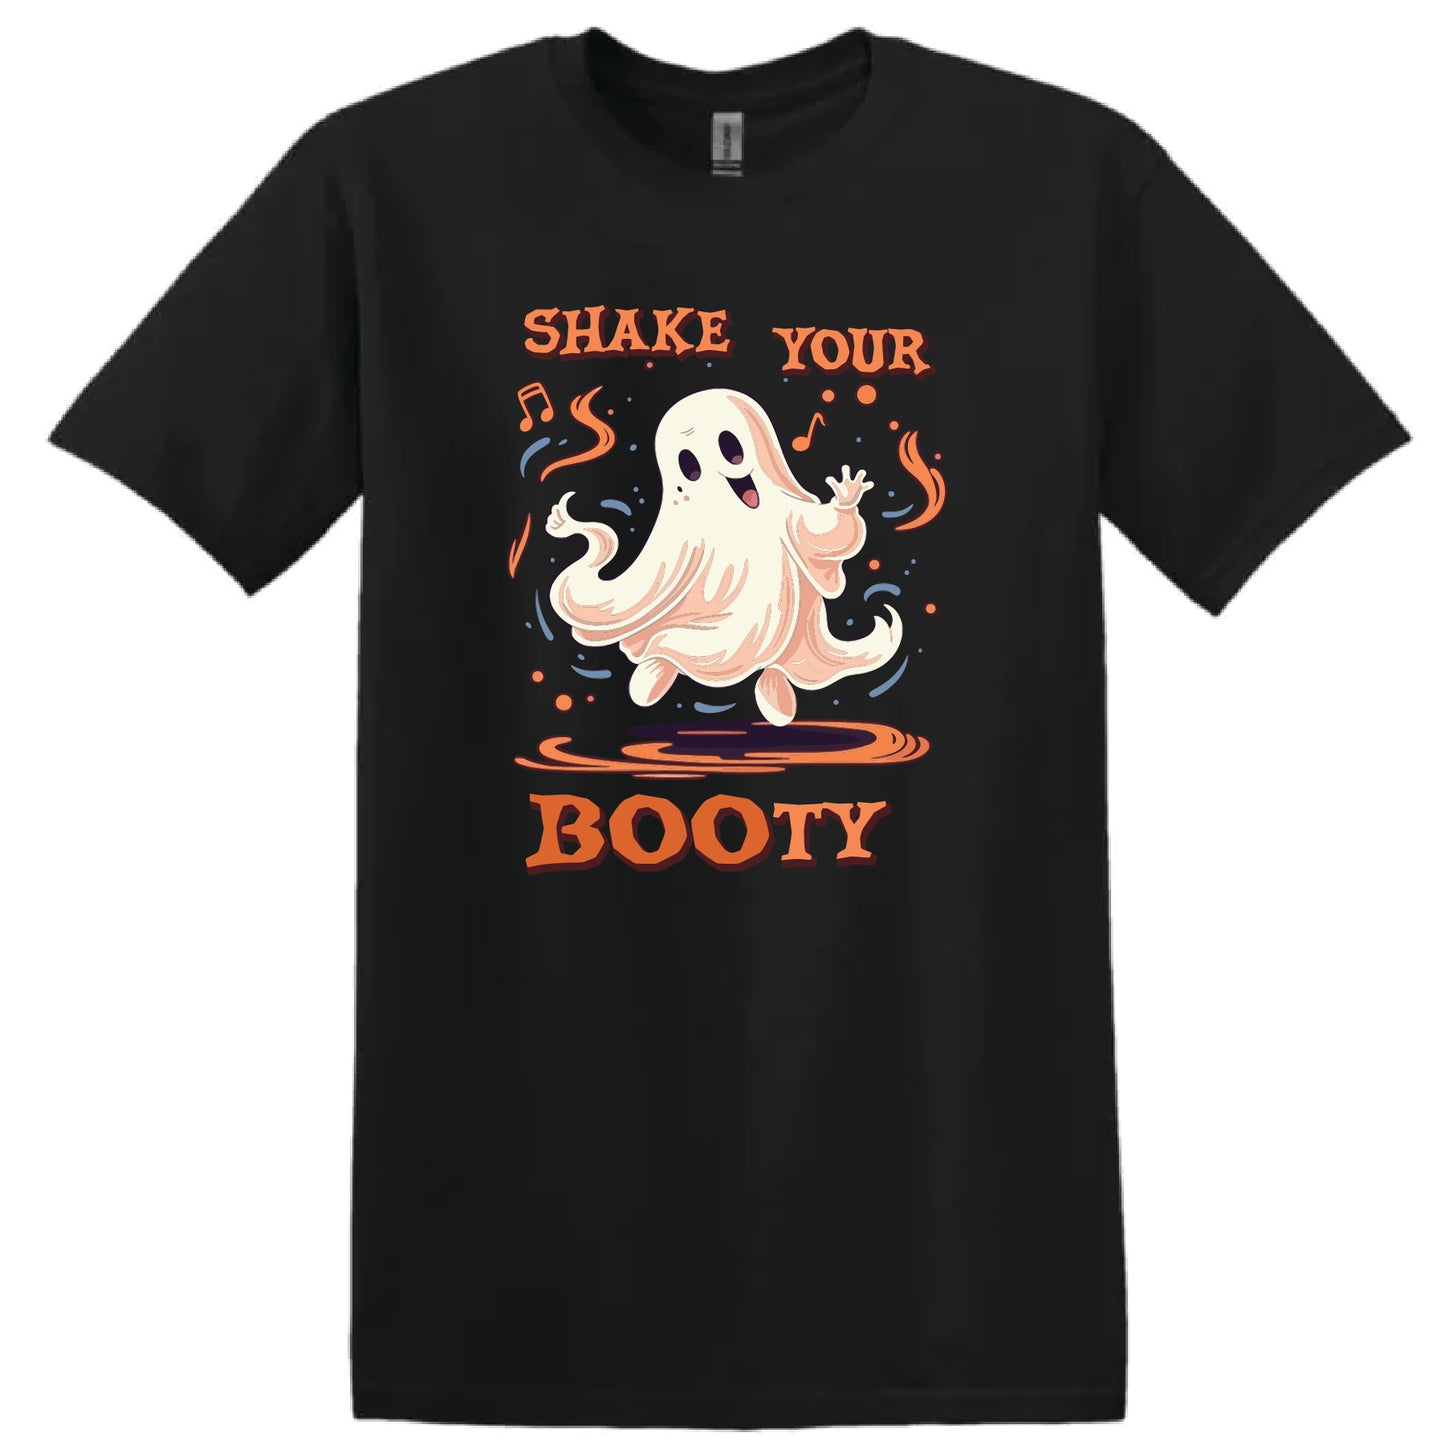 Shake your BOOty